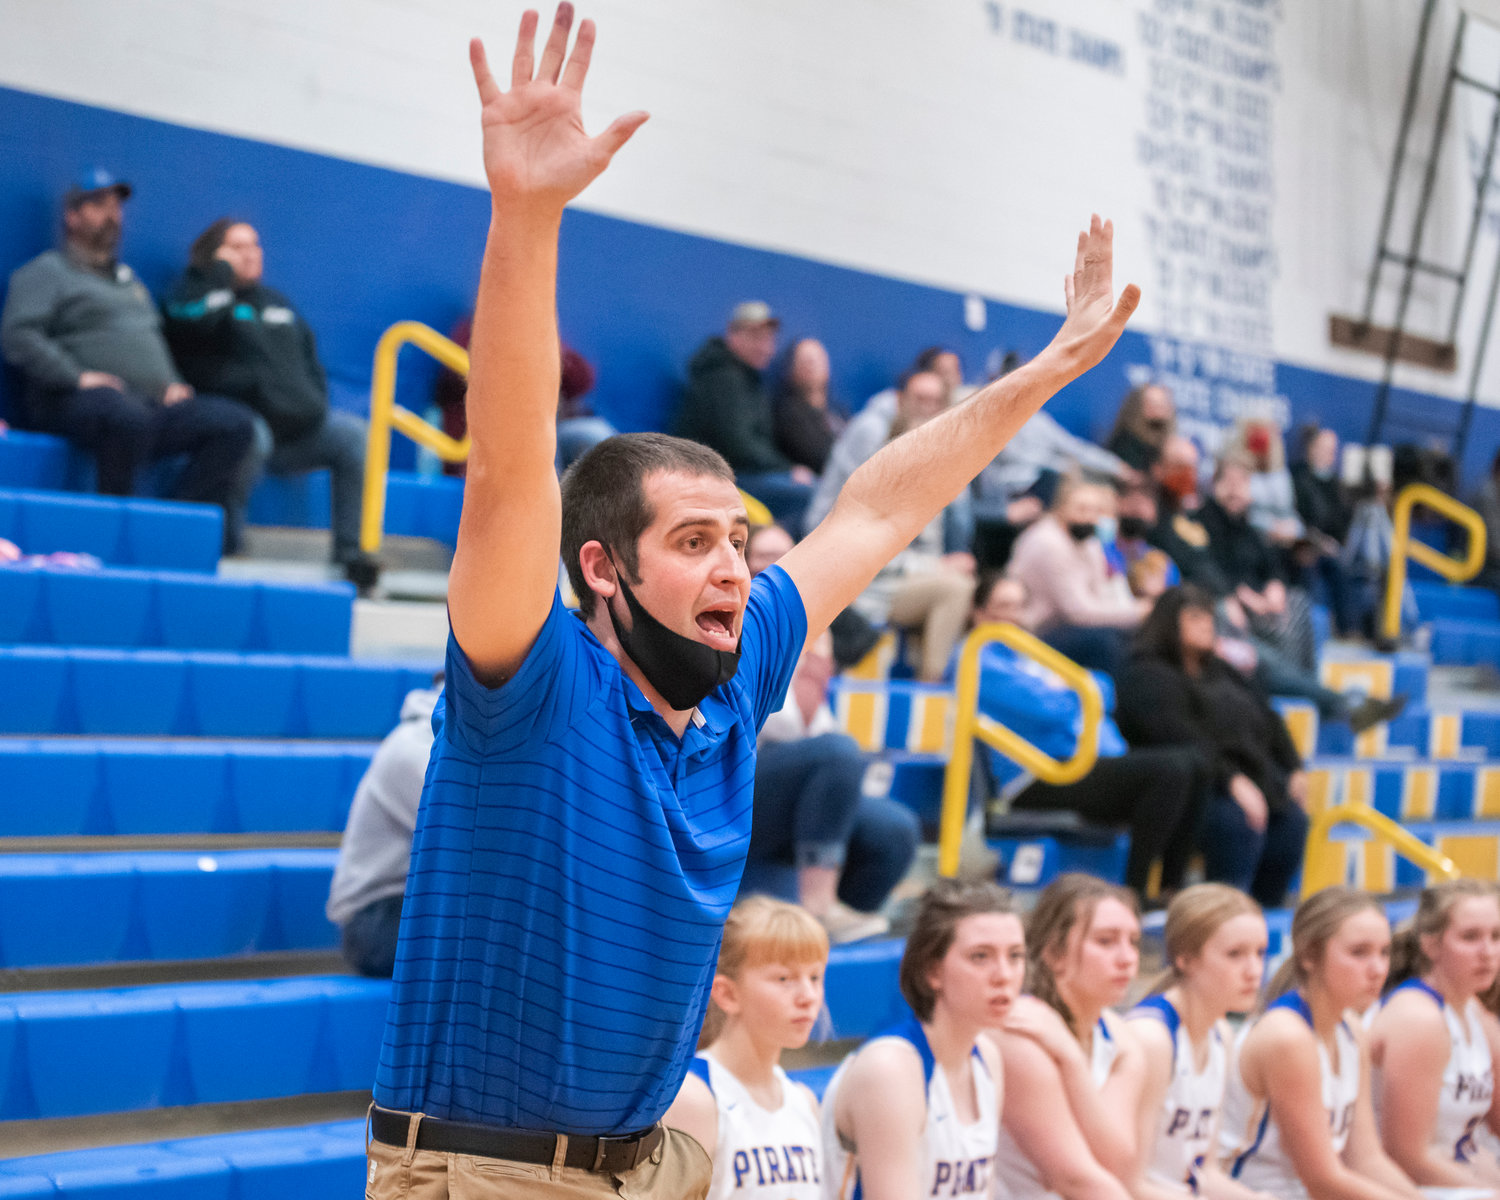 Adna Head Coach Chris Bannish yells to athletes on the court during a game Monday night.